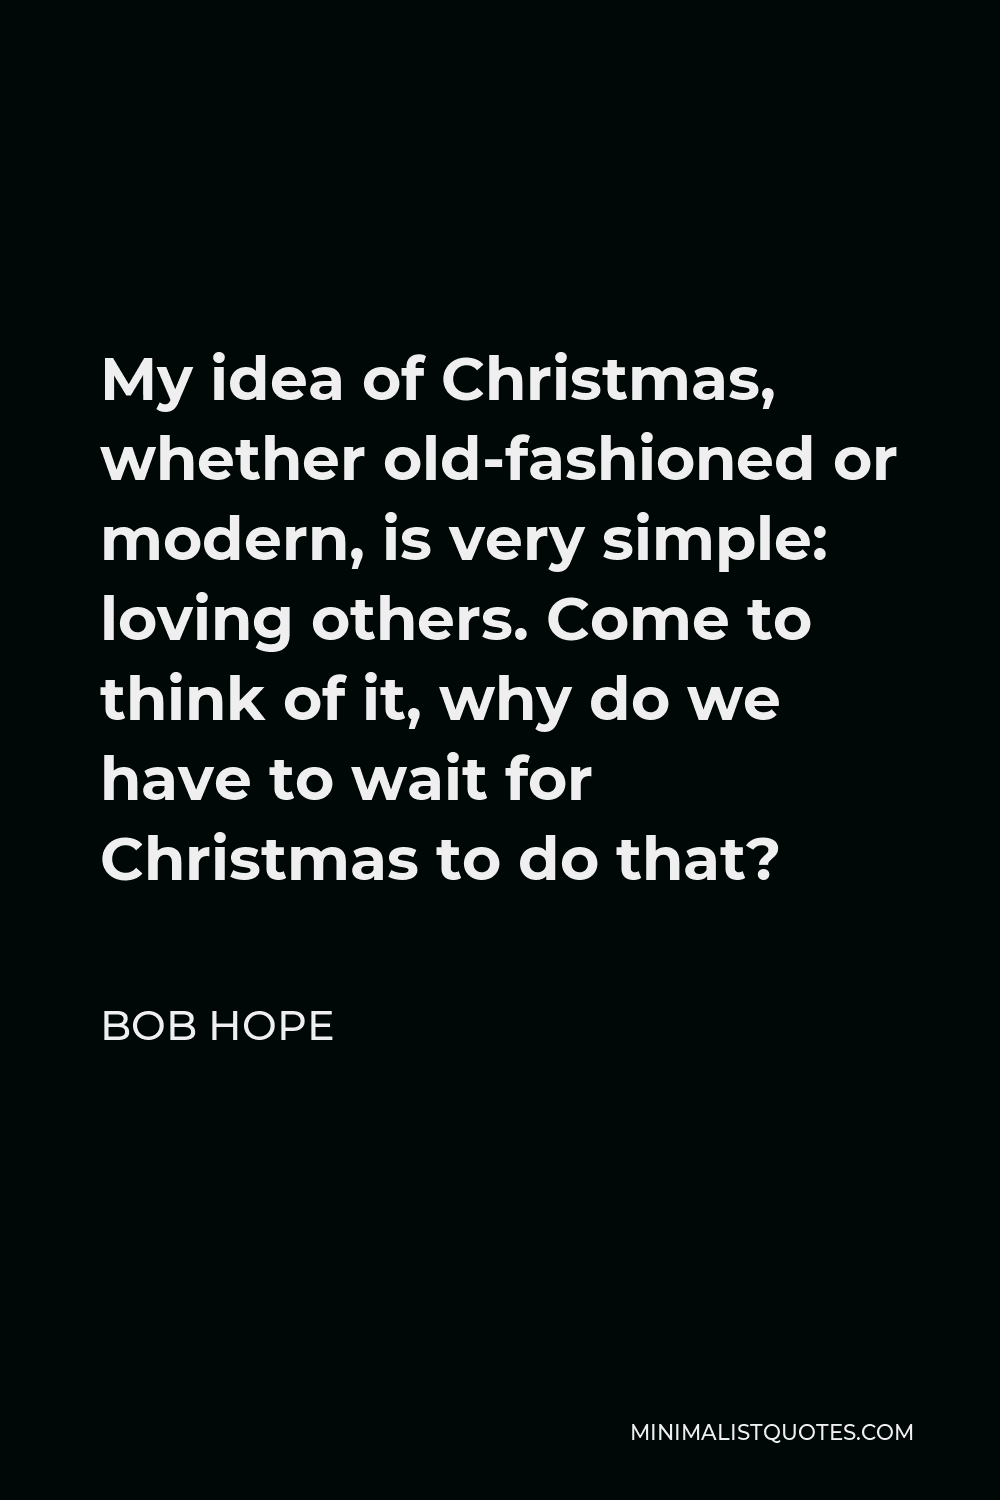 Bob Hope Quote - My idea of Christmas, whether old-fashioned or modern, is very simple: loving others. Come to think of it, why do we have to wait for Christmas to do that?